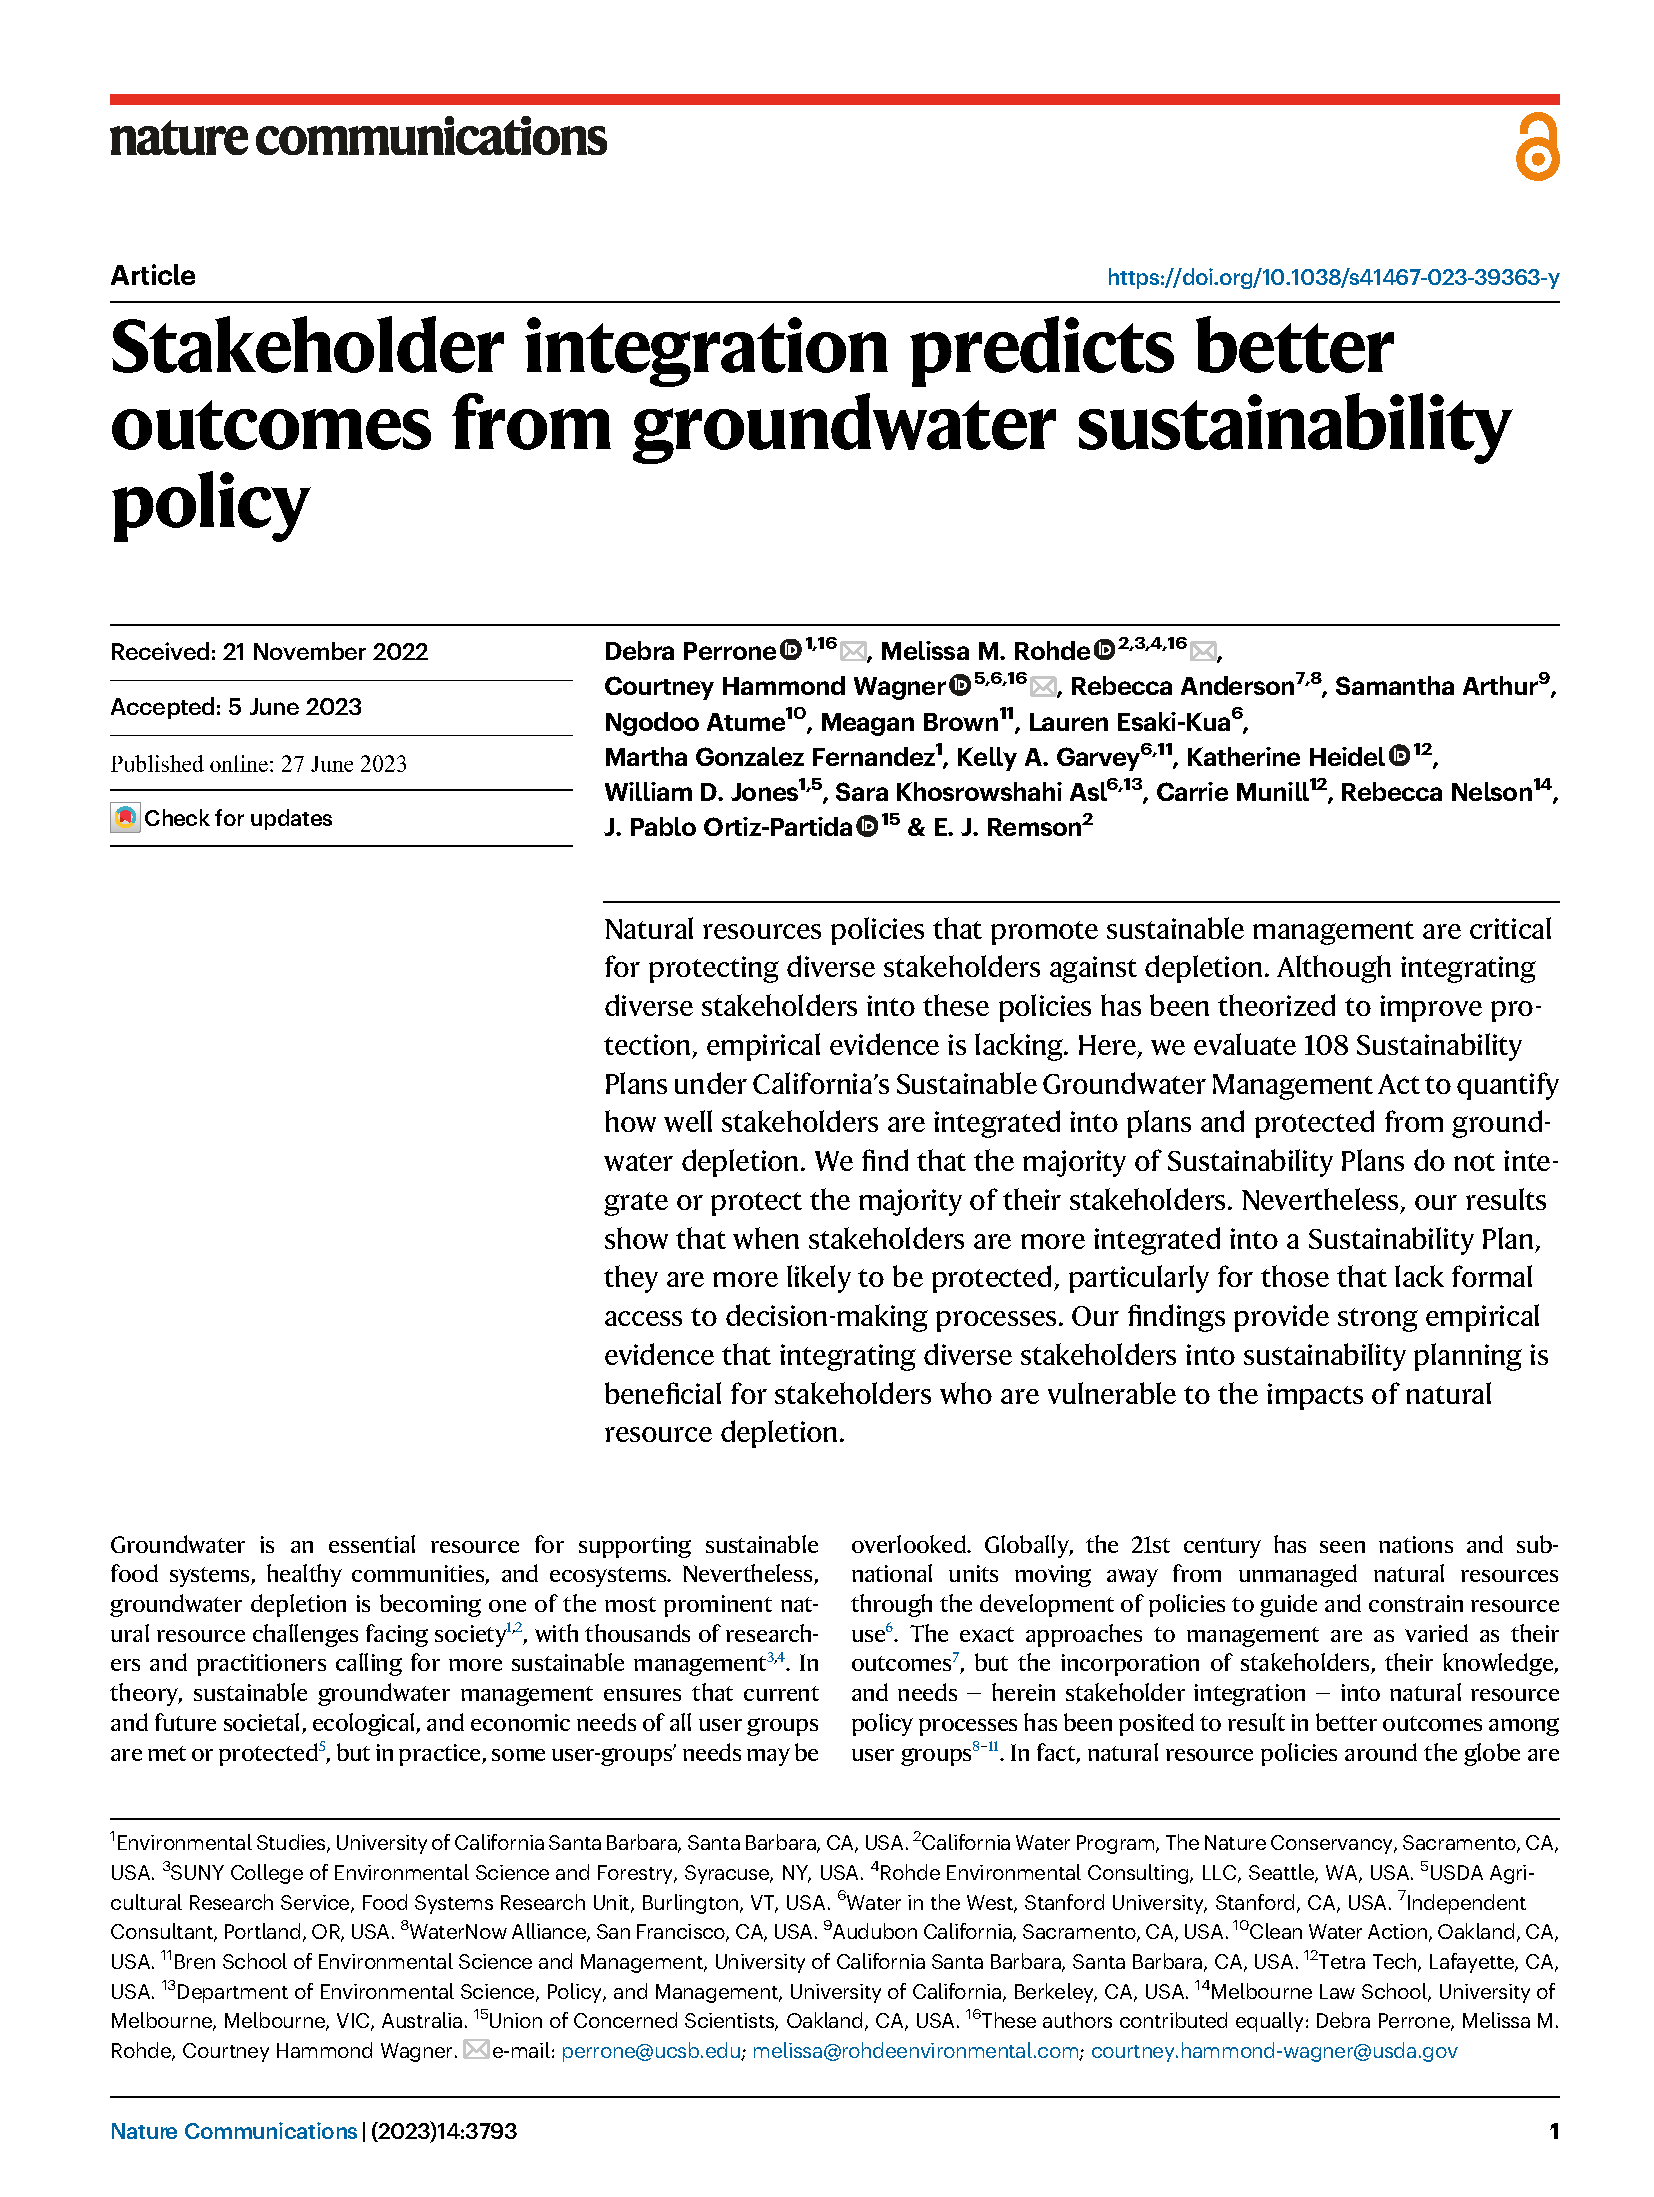 Stakeholder integration and groundwater sustainability